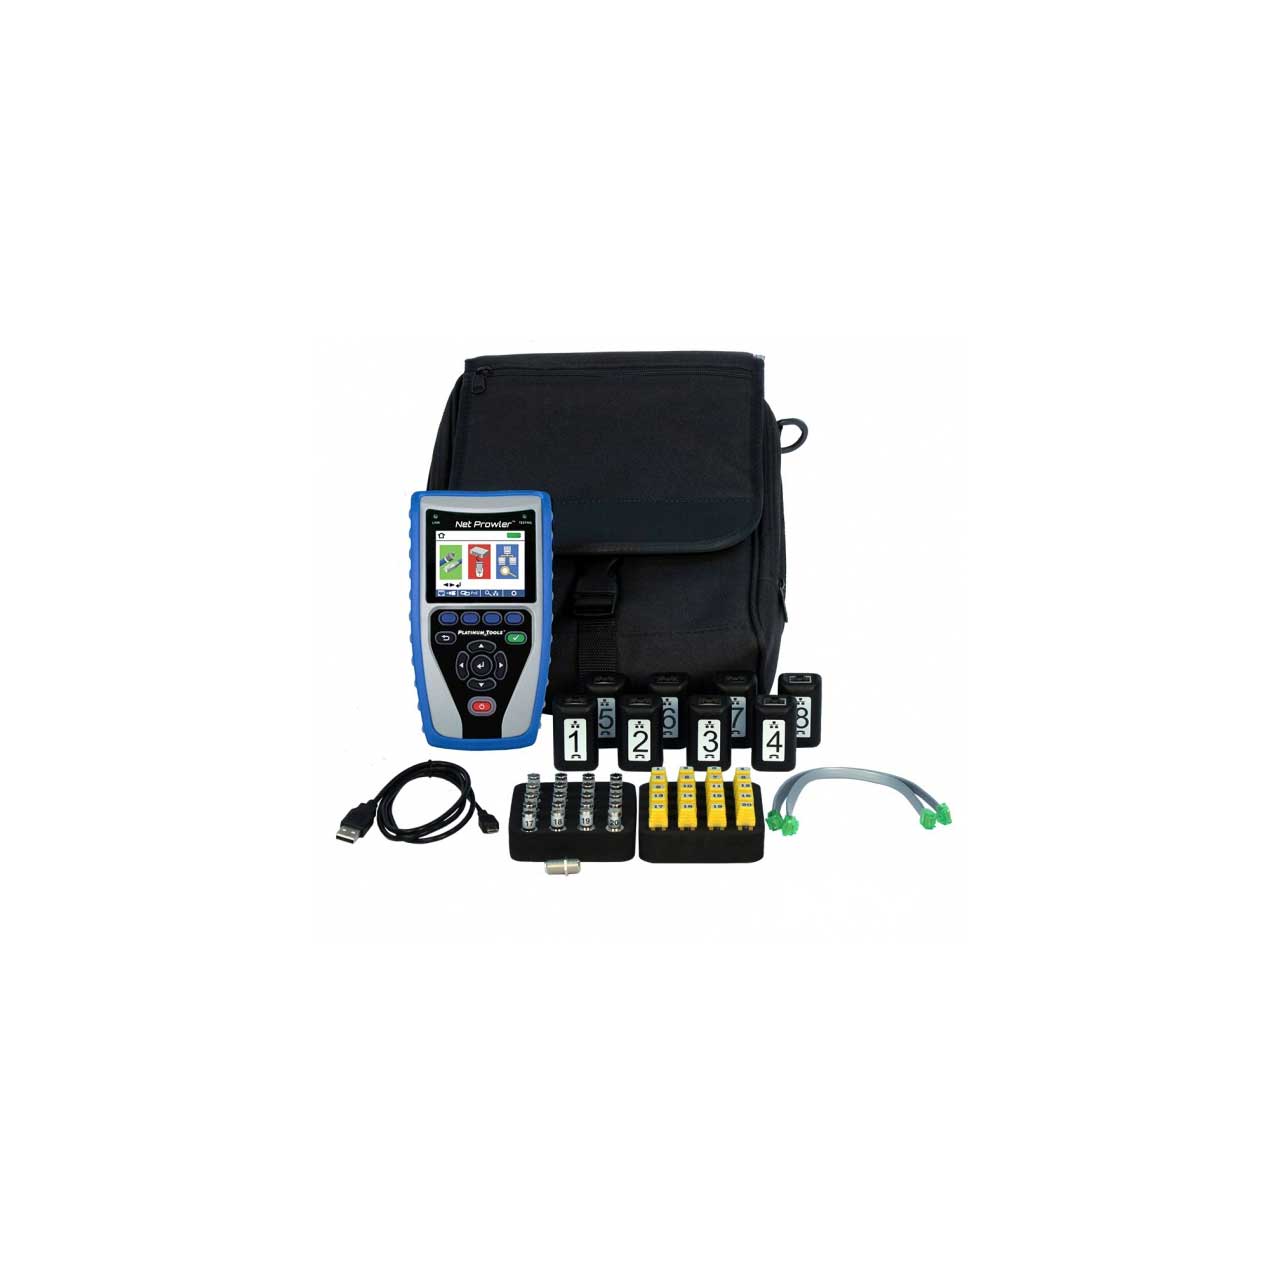 Platinum Tools TNP800 Net Prowler Deluxe PRO Test Kit for Cabling and Network TNP800